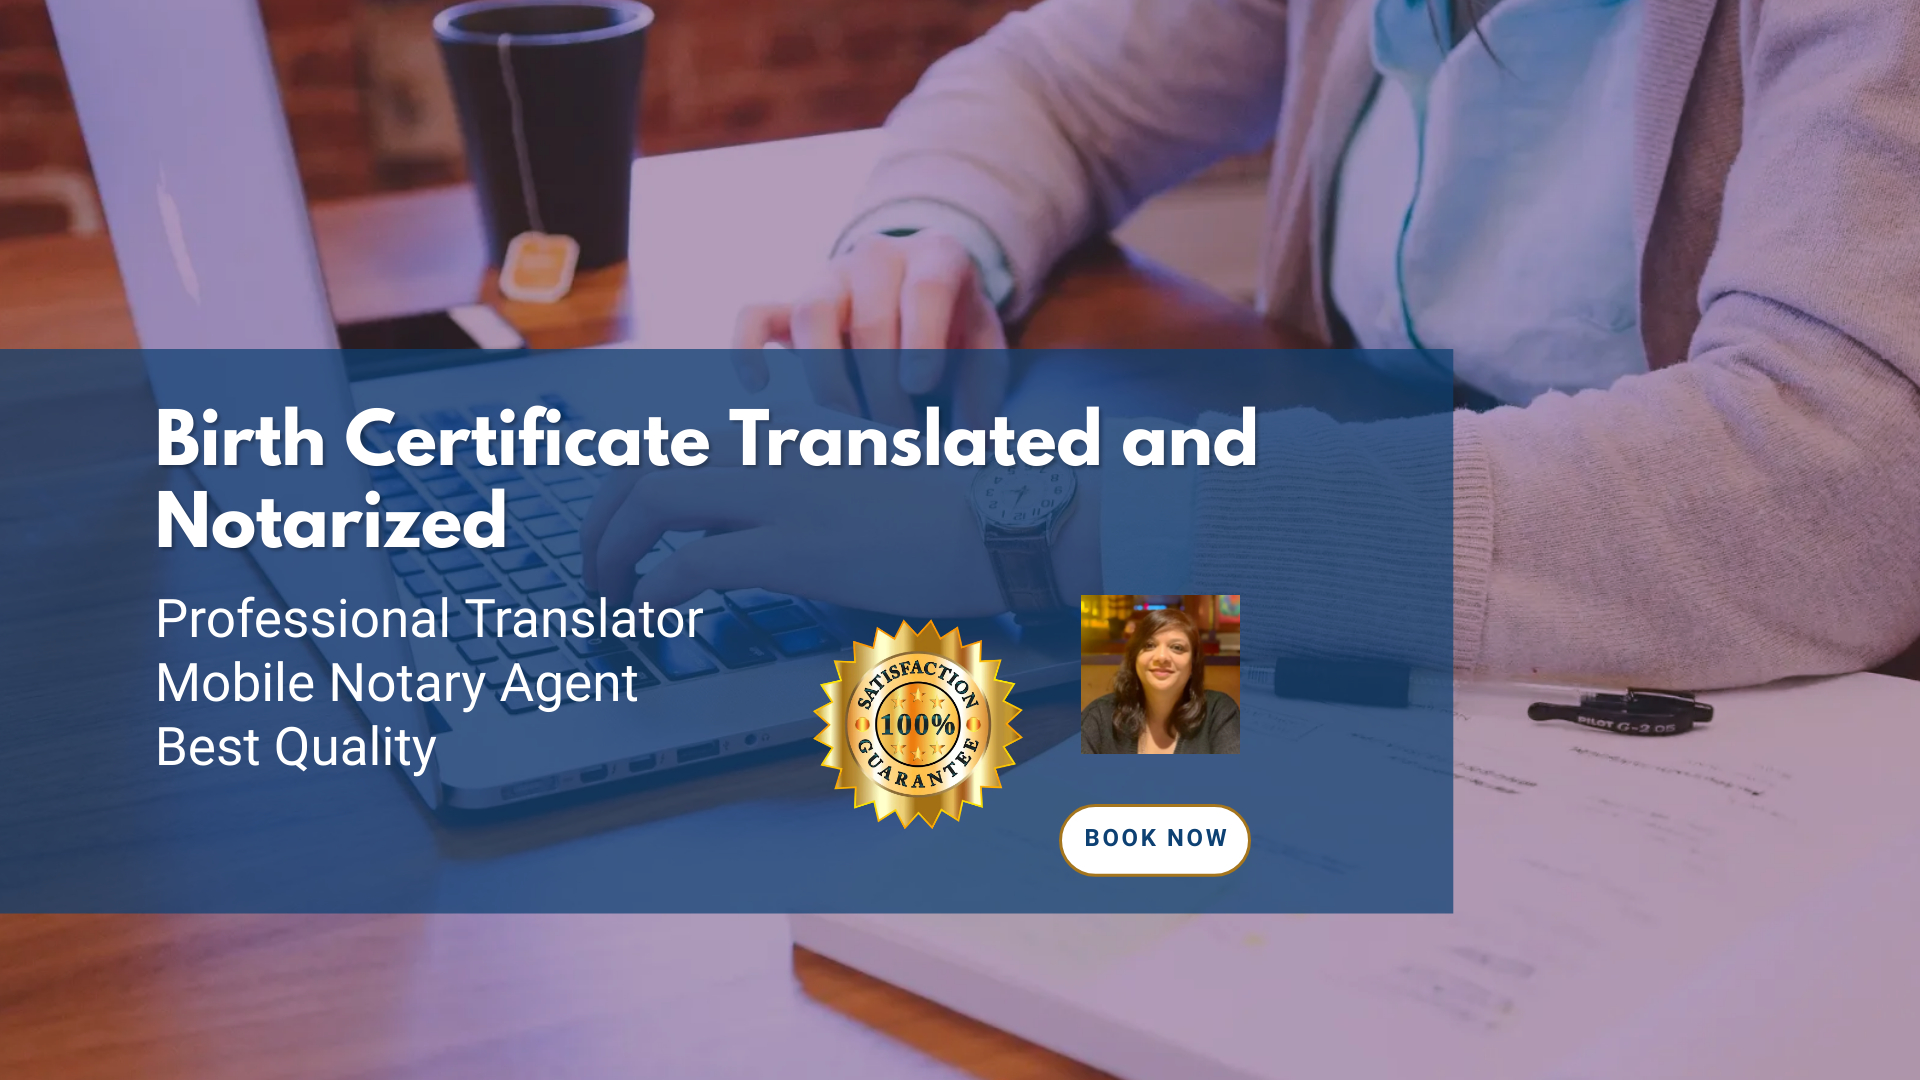 Where To Get Birth Certificate Translated and Notarized Near Me? - PDX Signing